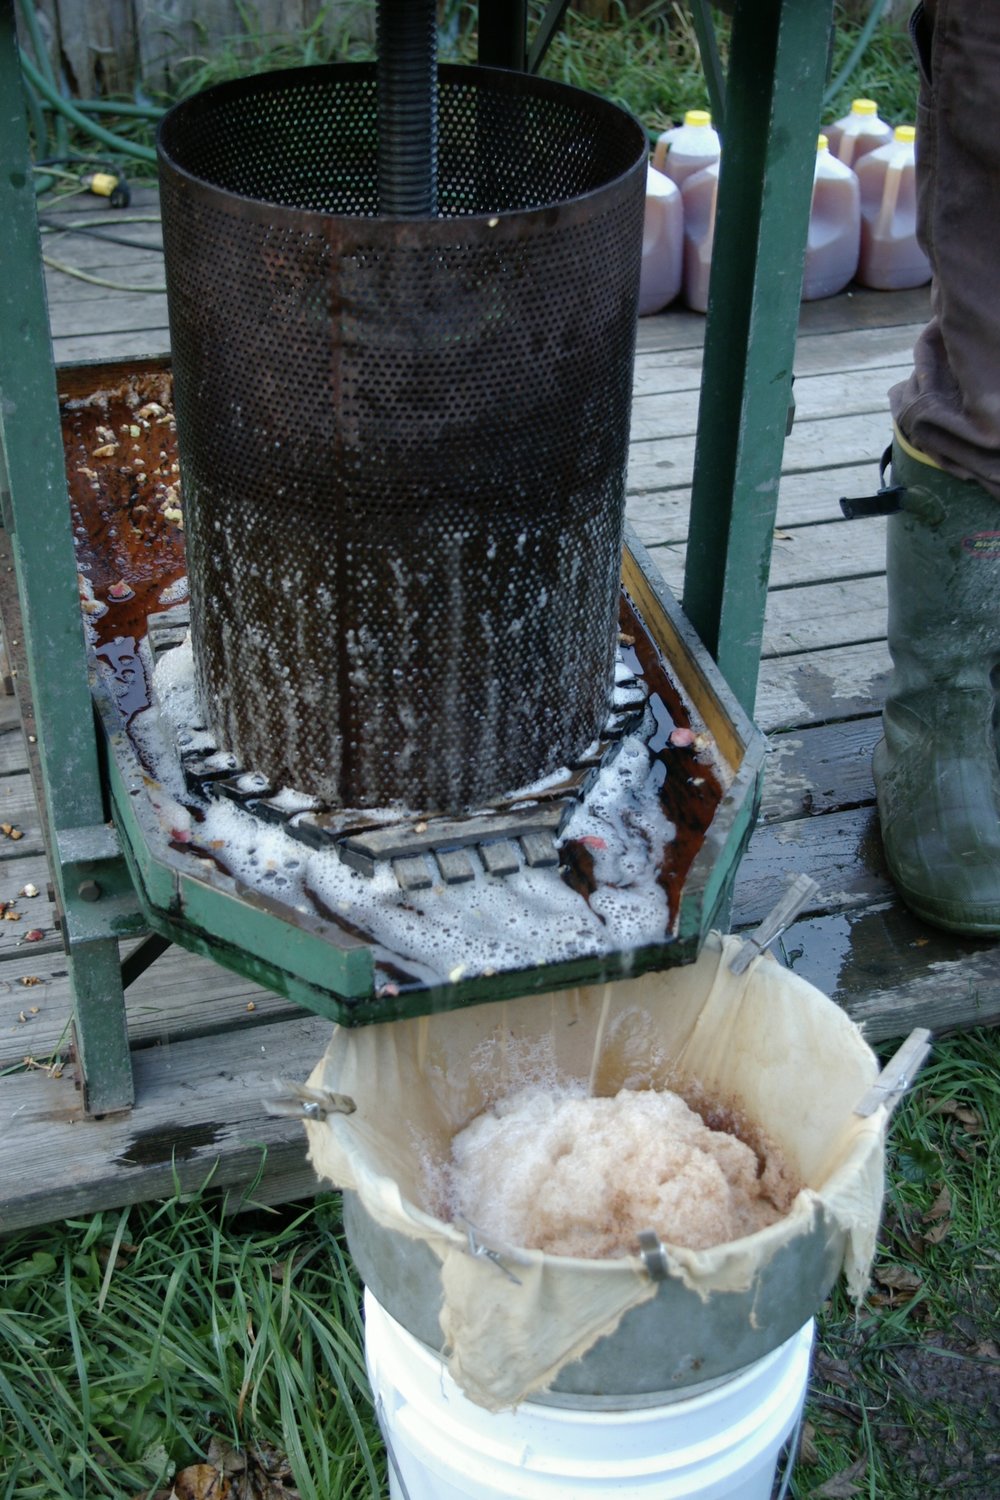  The ground apples being pressed into cider 